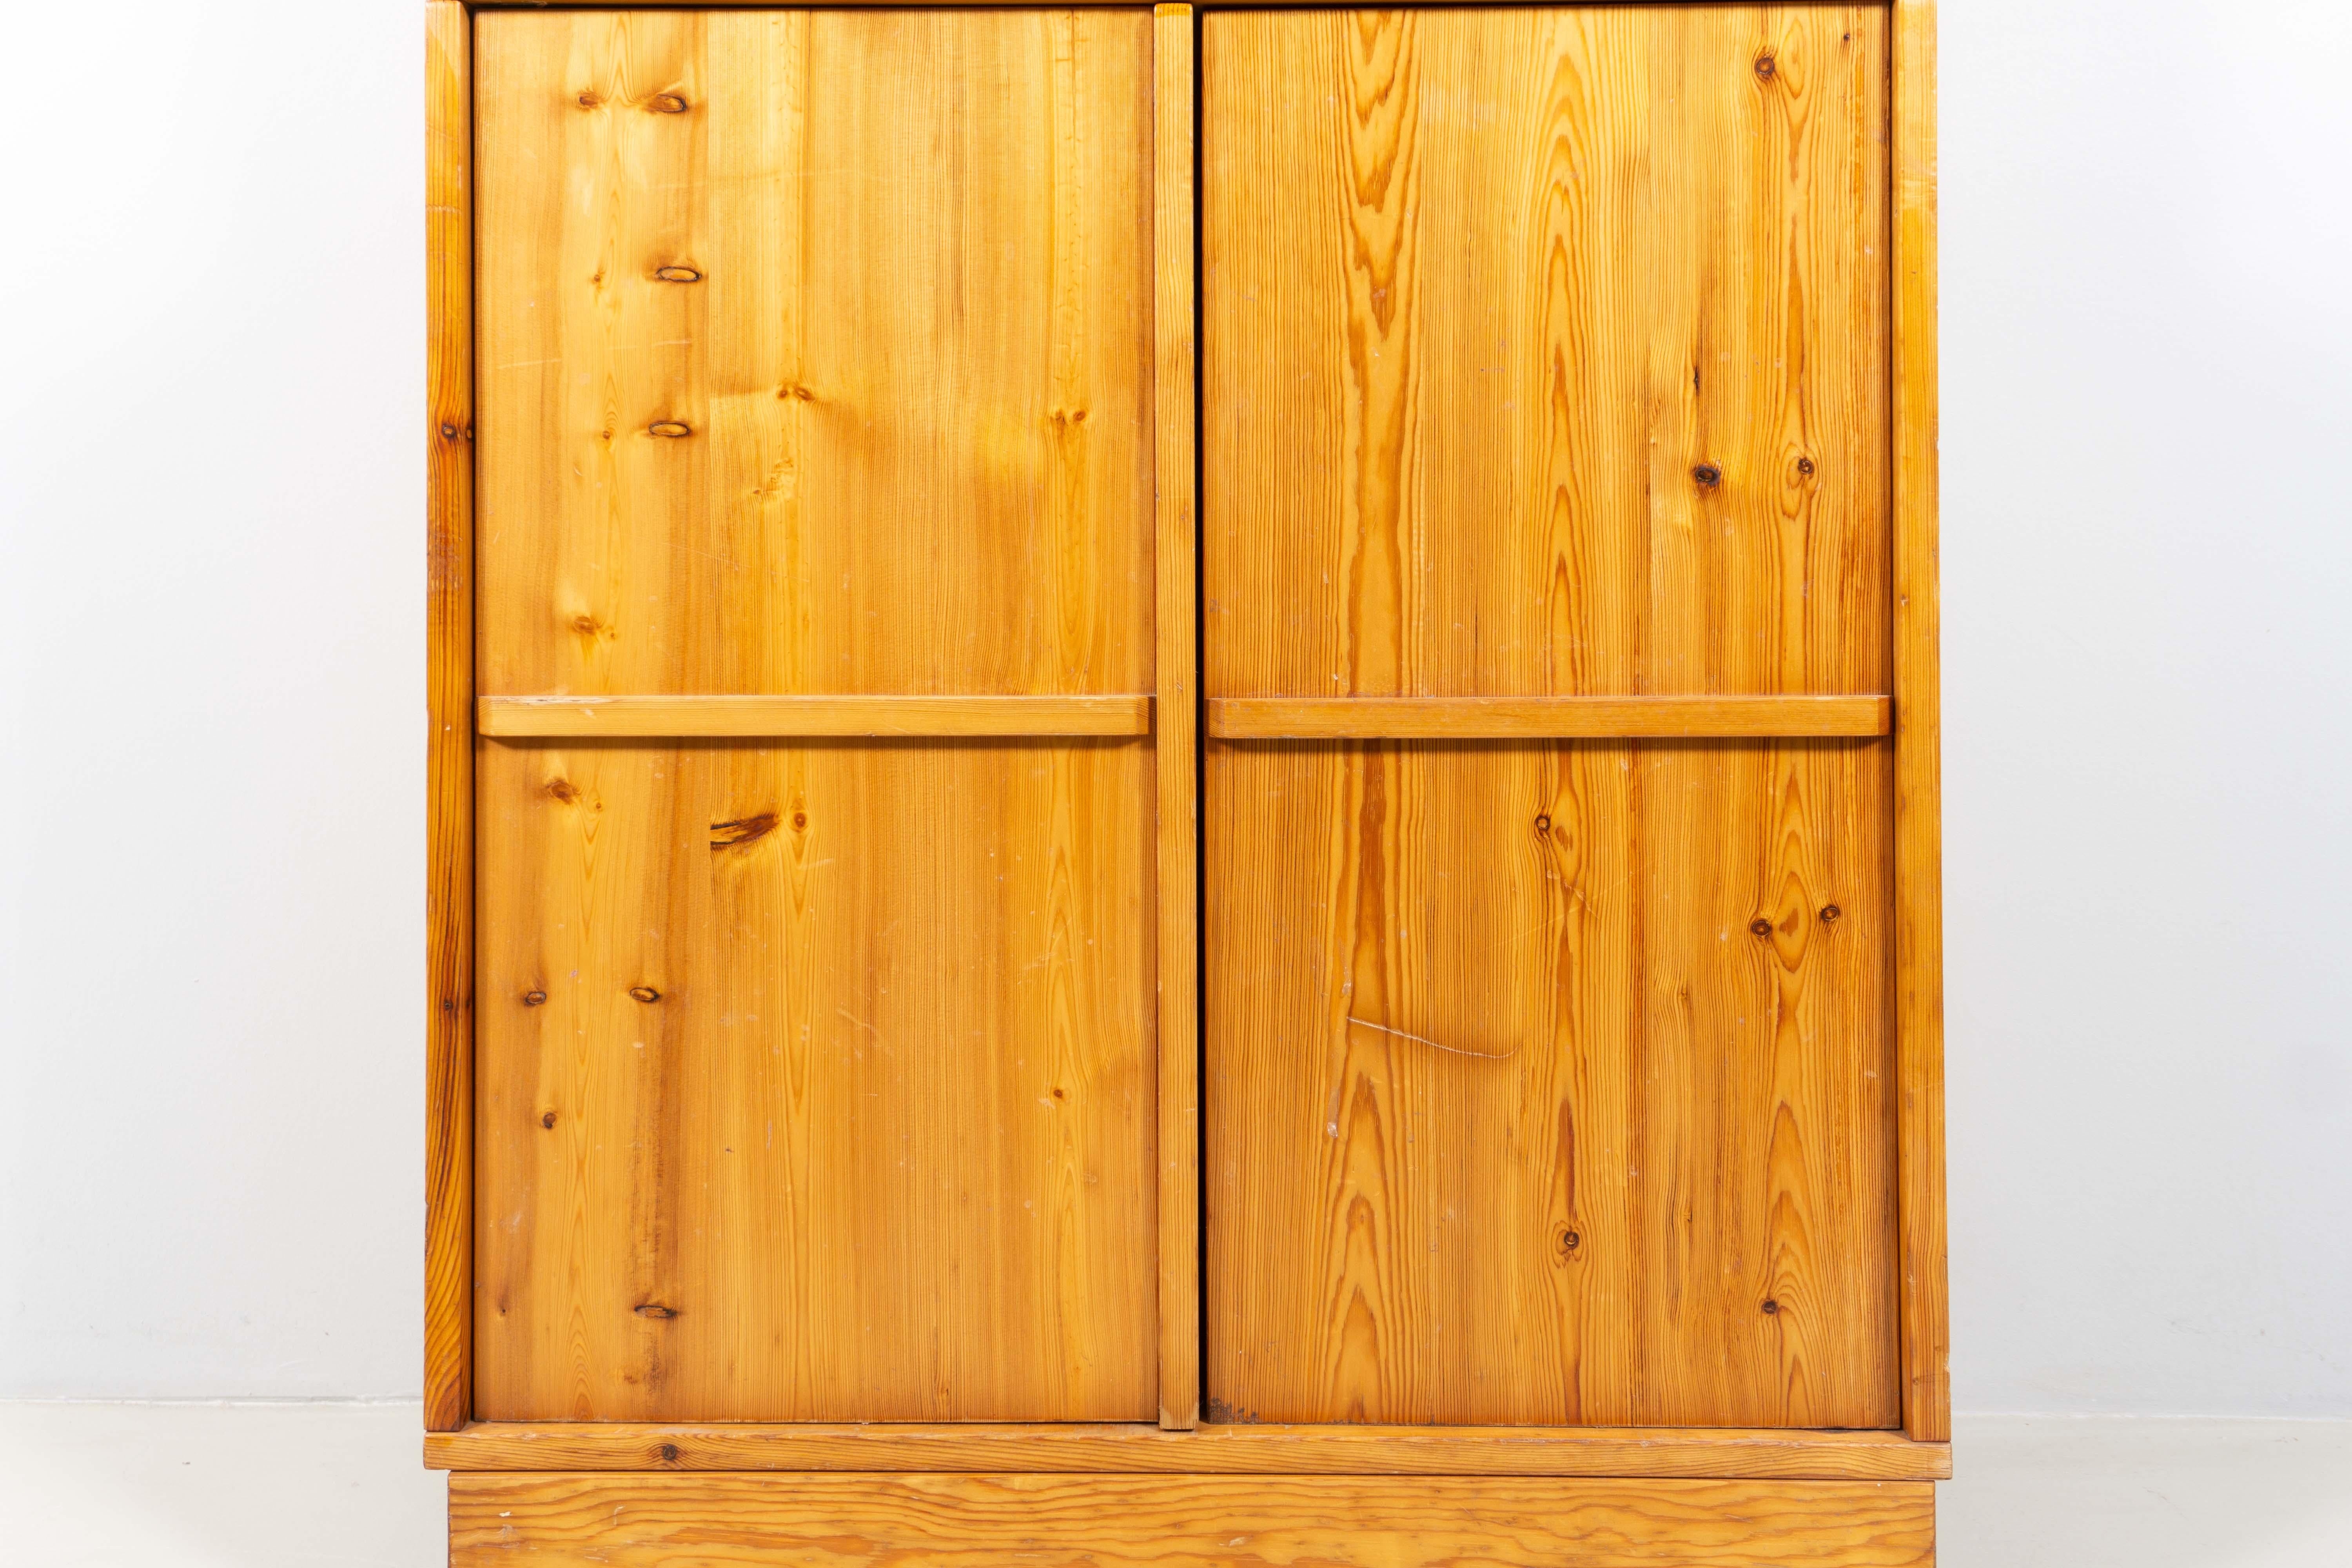 Gianfranco Fini designed this beautiful cupboard in 1972. It convinces with its puristic, beautiful proportion and consists of two pieces. The bottom part differs from the upper part because of its depth and two doors. Behind the door is another